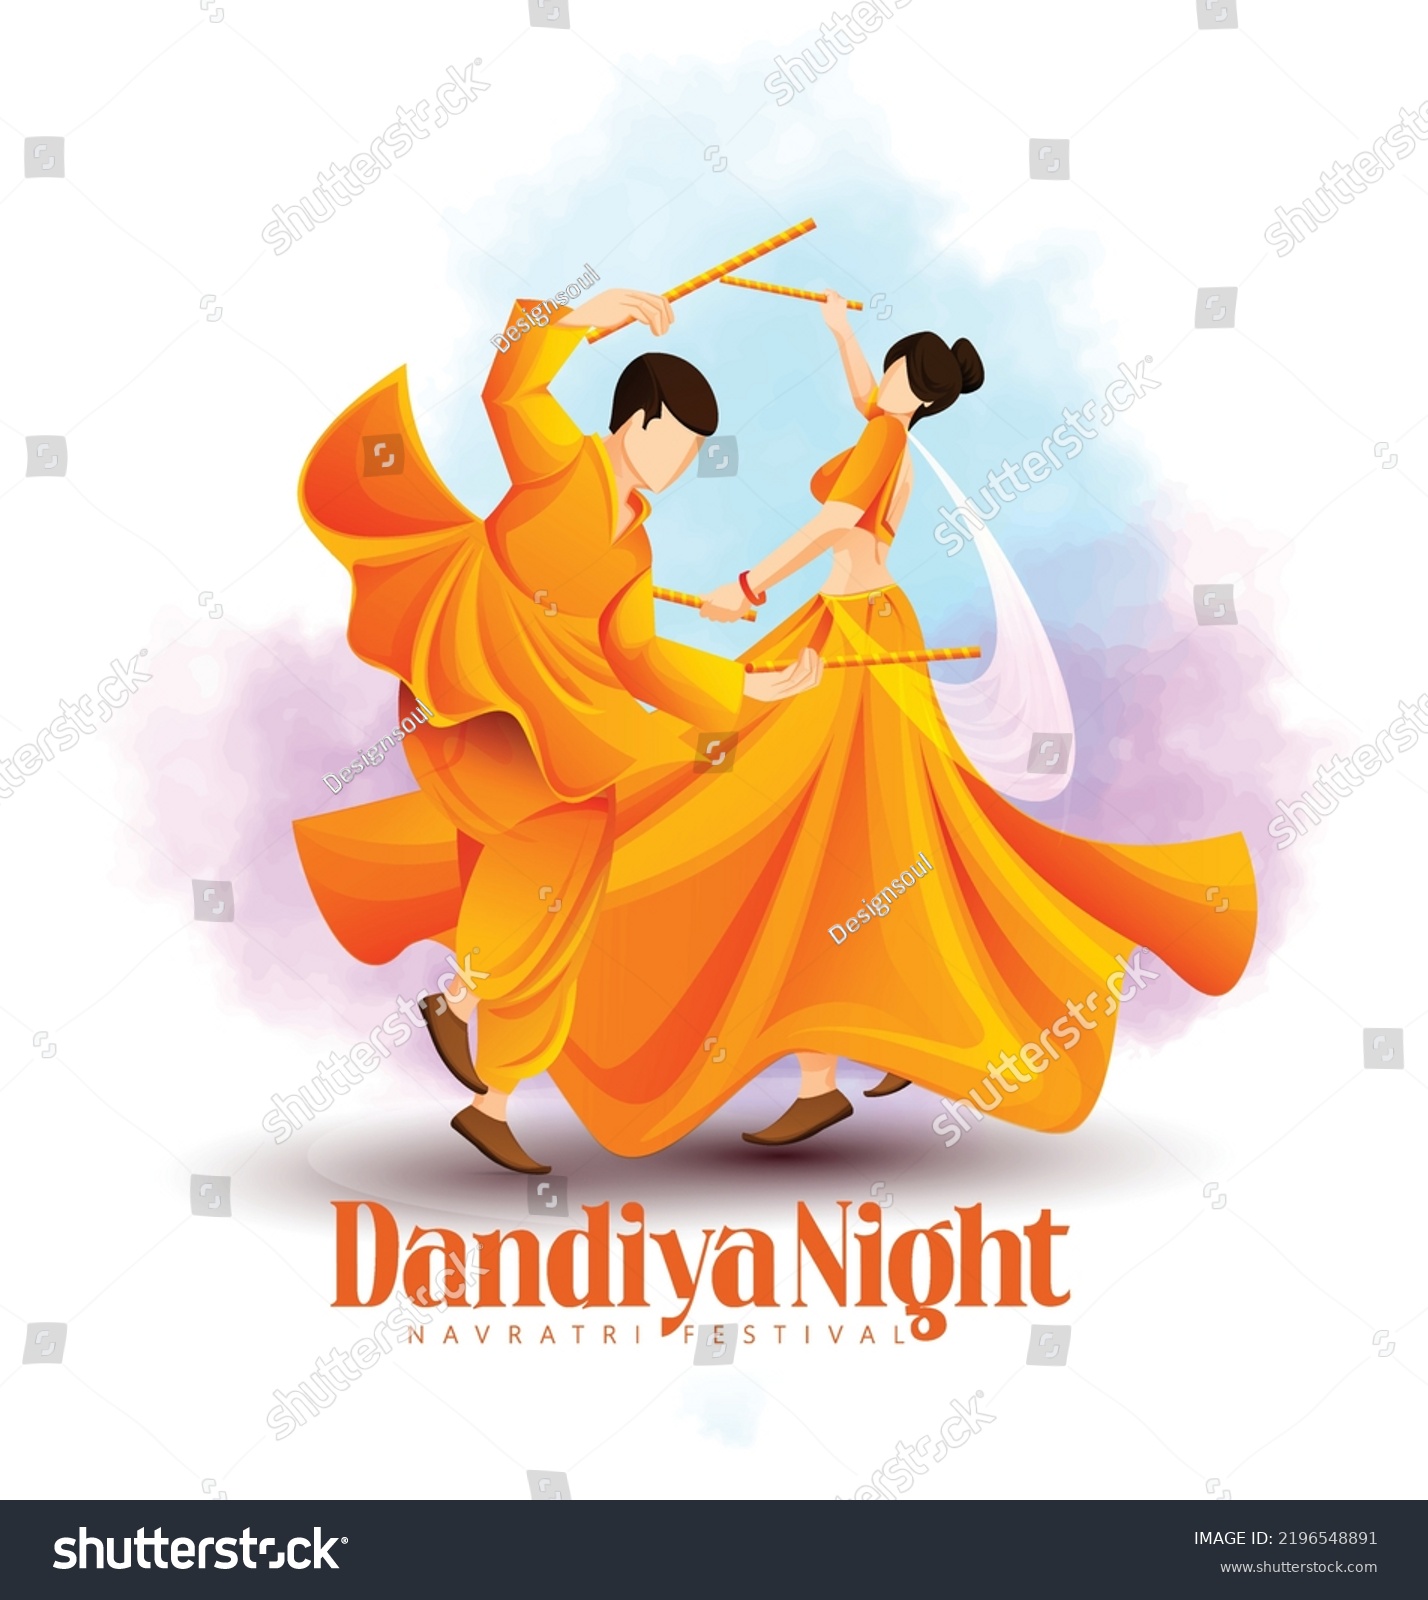 SVG of illustration of couple playing Dandiya for Subh Navratri Indian religious festival background svg